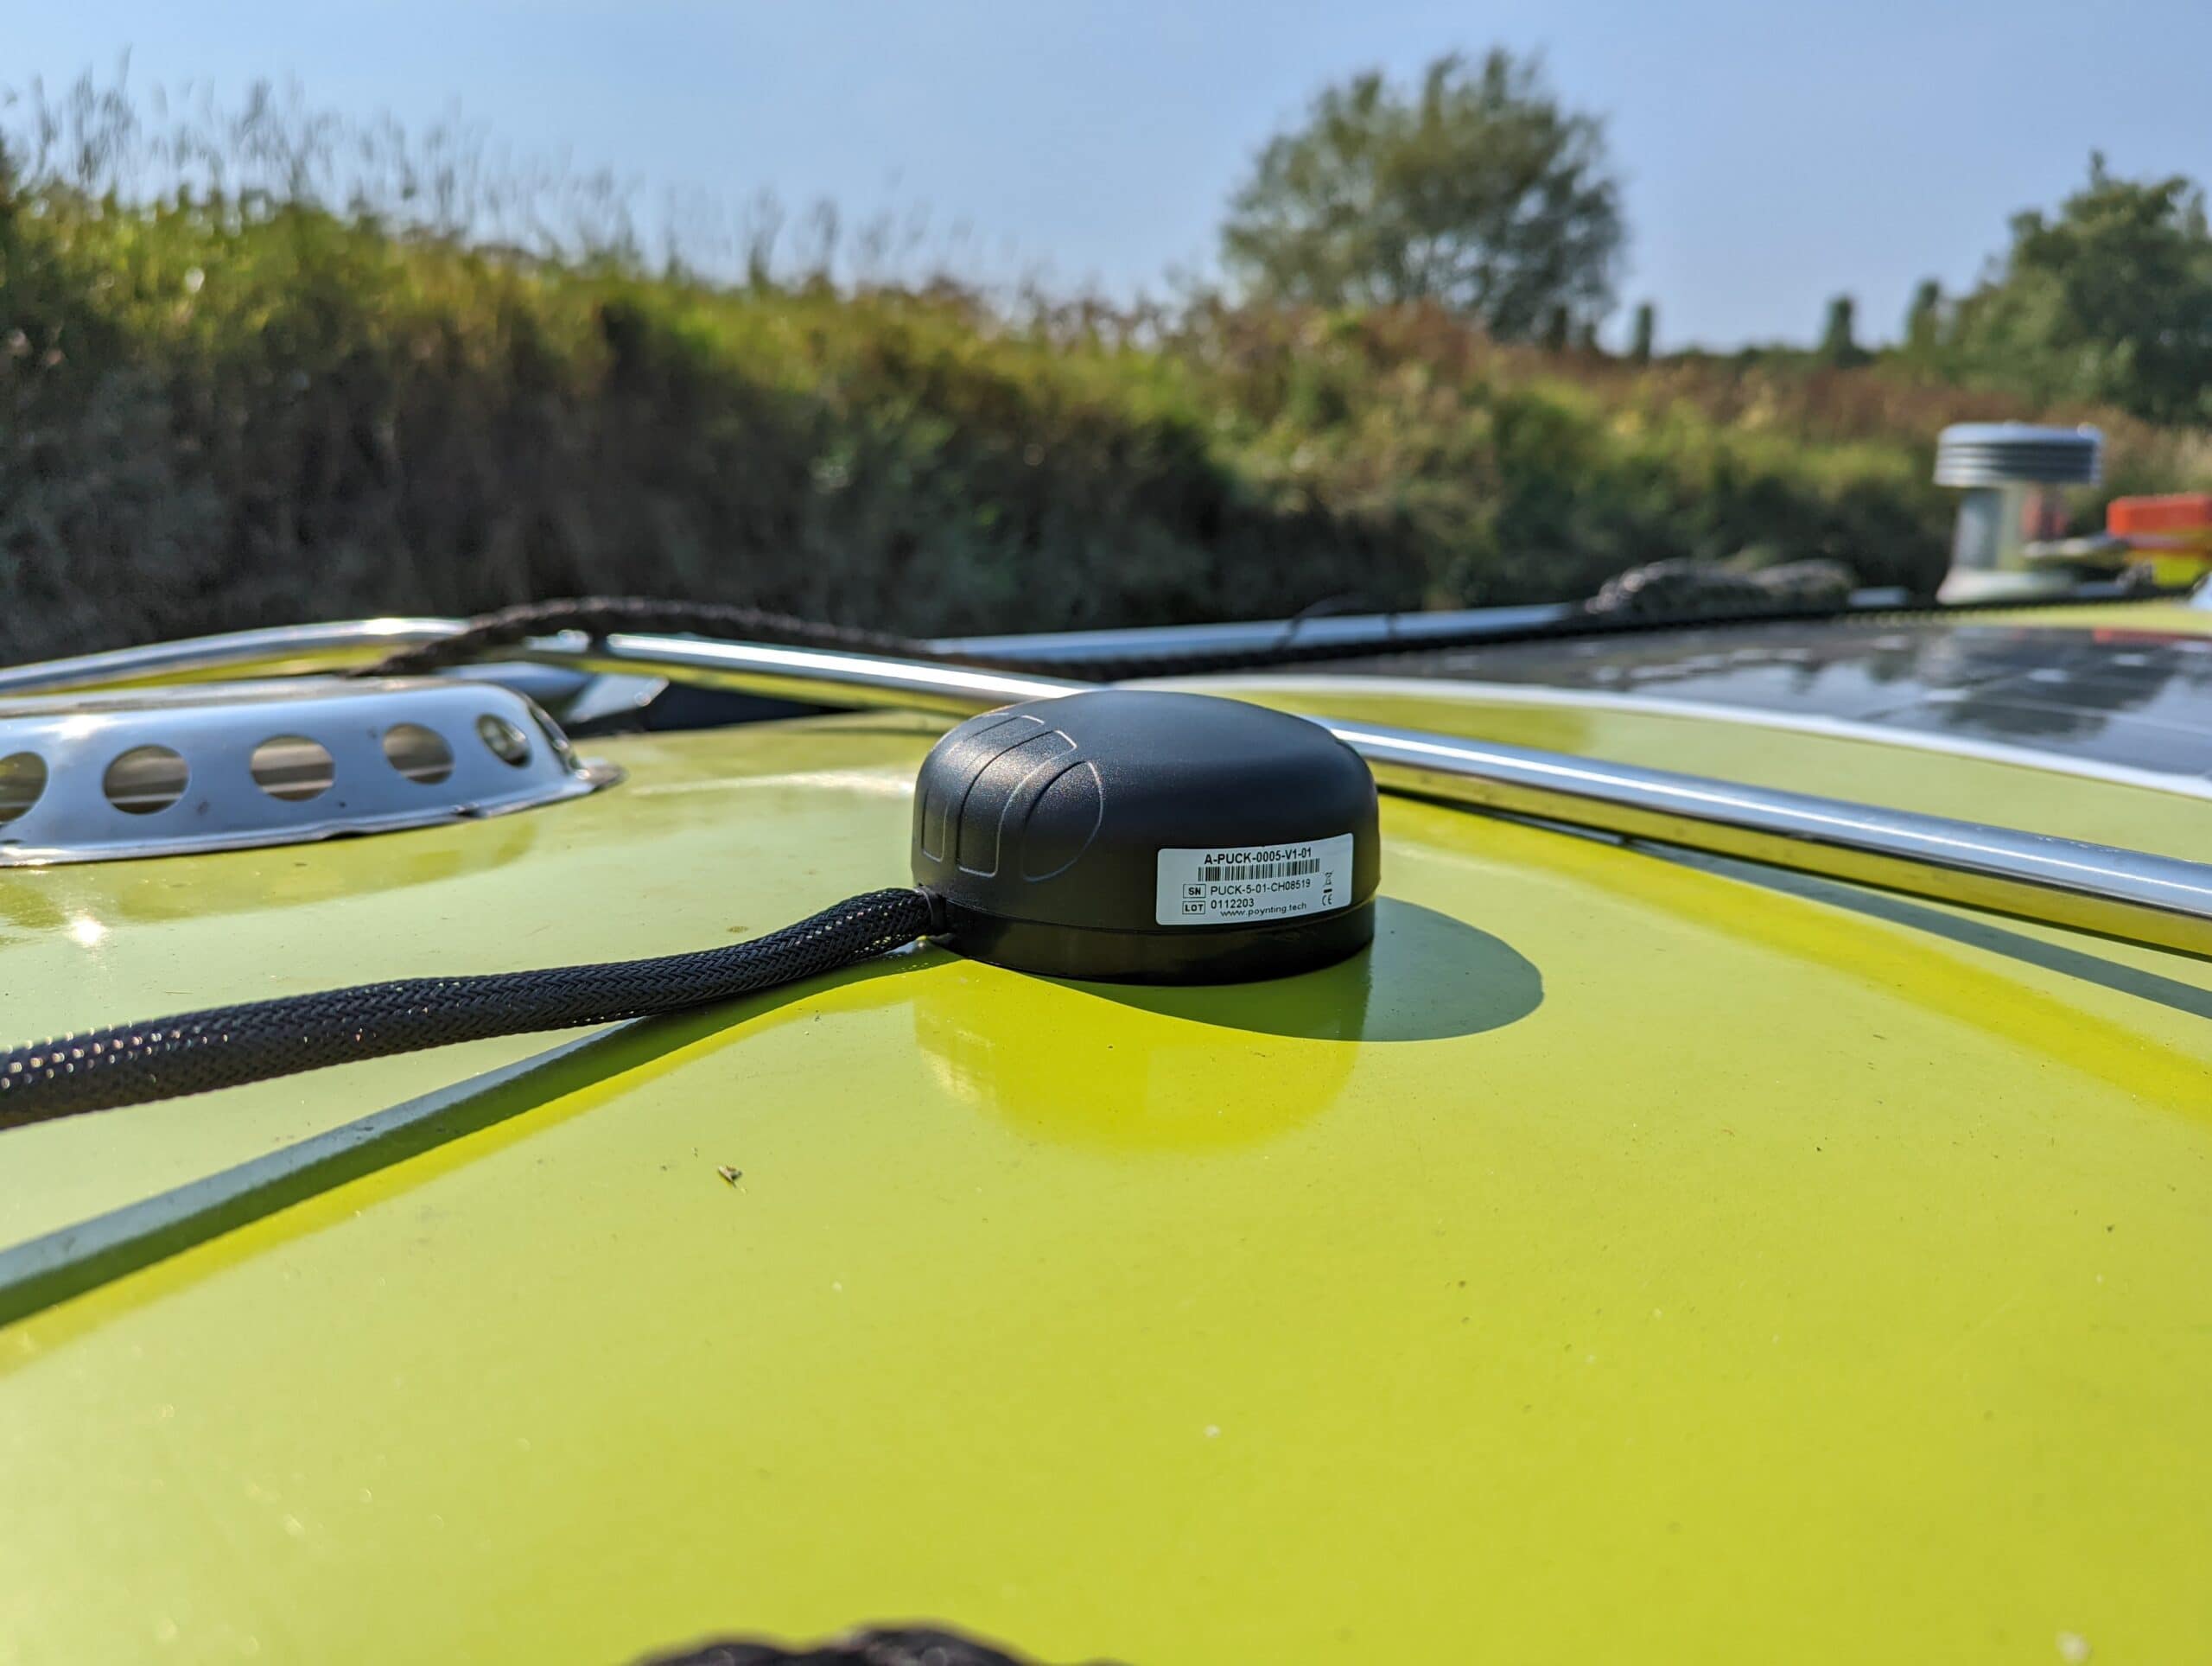 Poynting PUCK-5 Omni-Directional LTE / WiFi / GPS Antenna Review – Ideal for canal boats, camper vans and motor homes